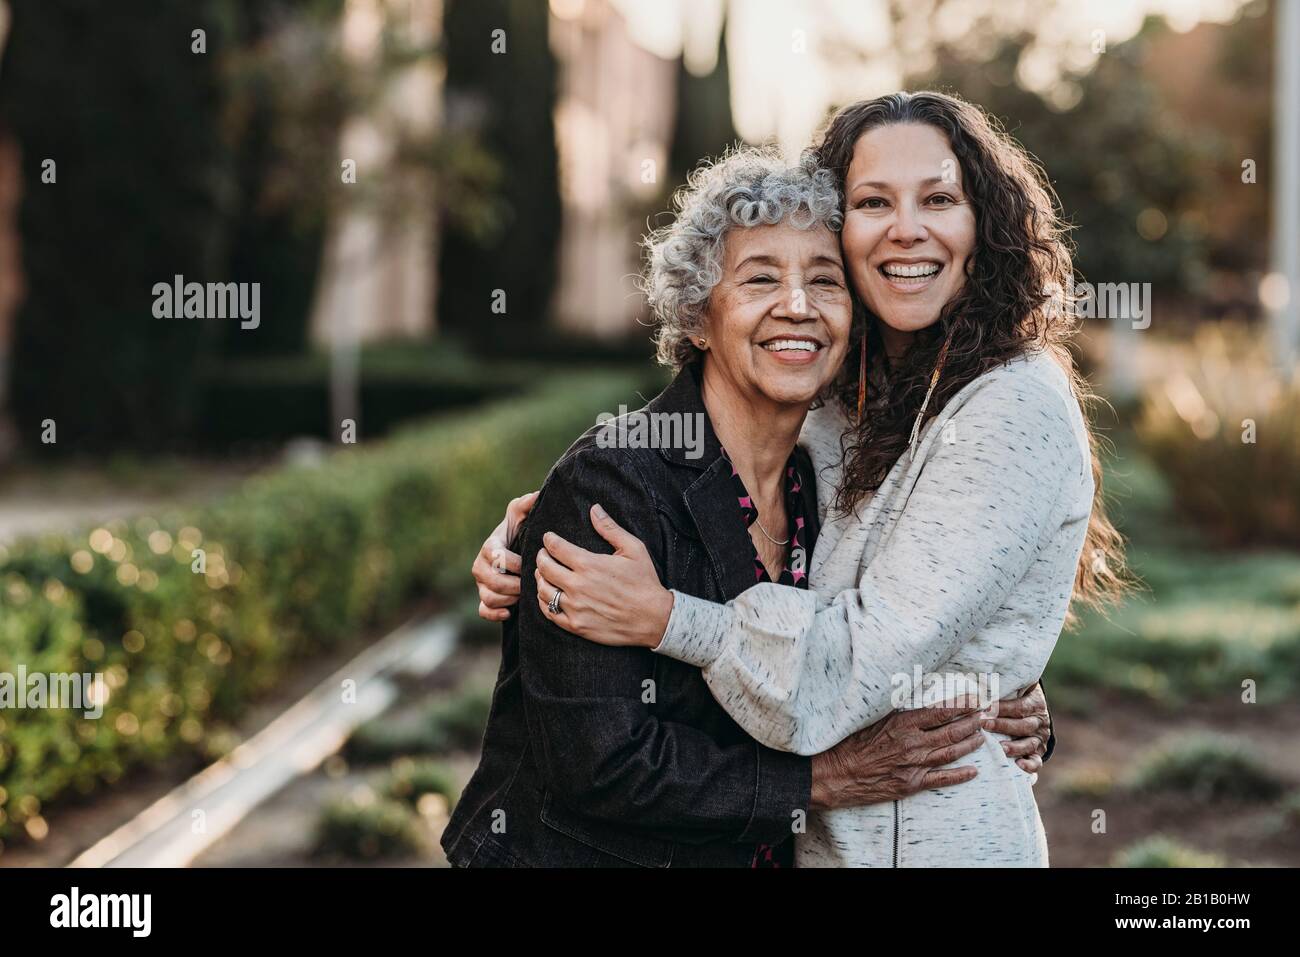 Portrait of active senior grandmother and adult daughter smiling Stock Photo